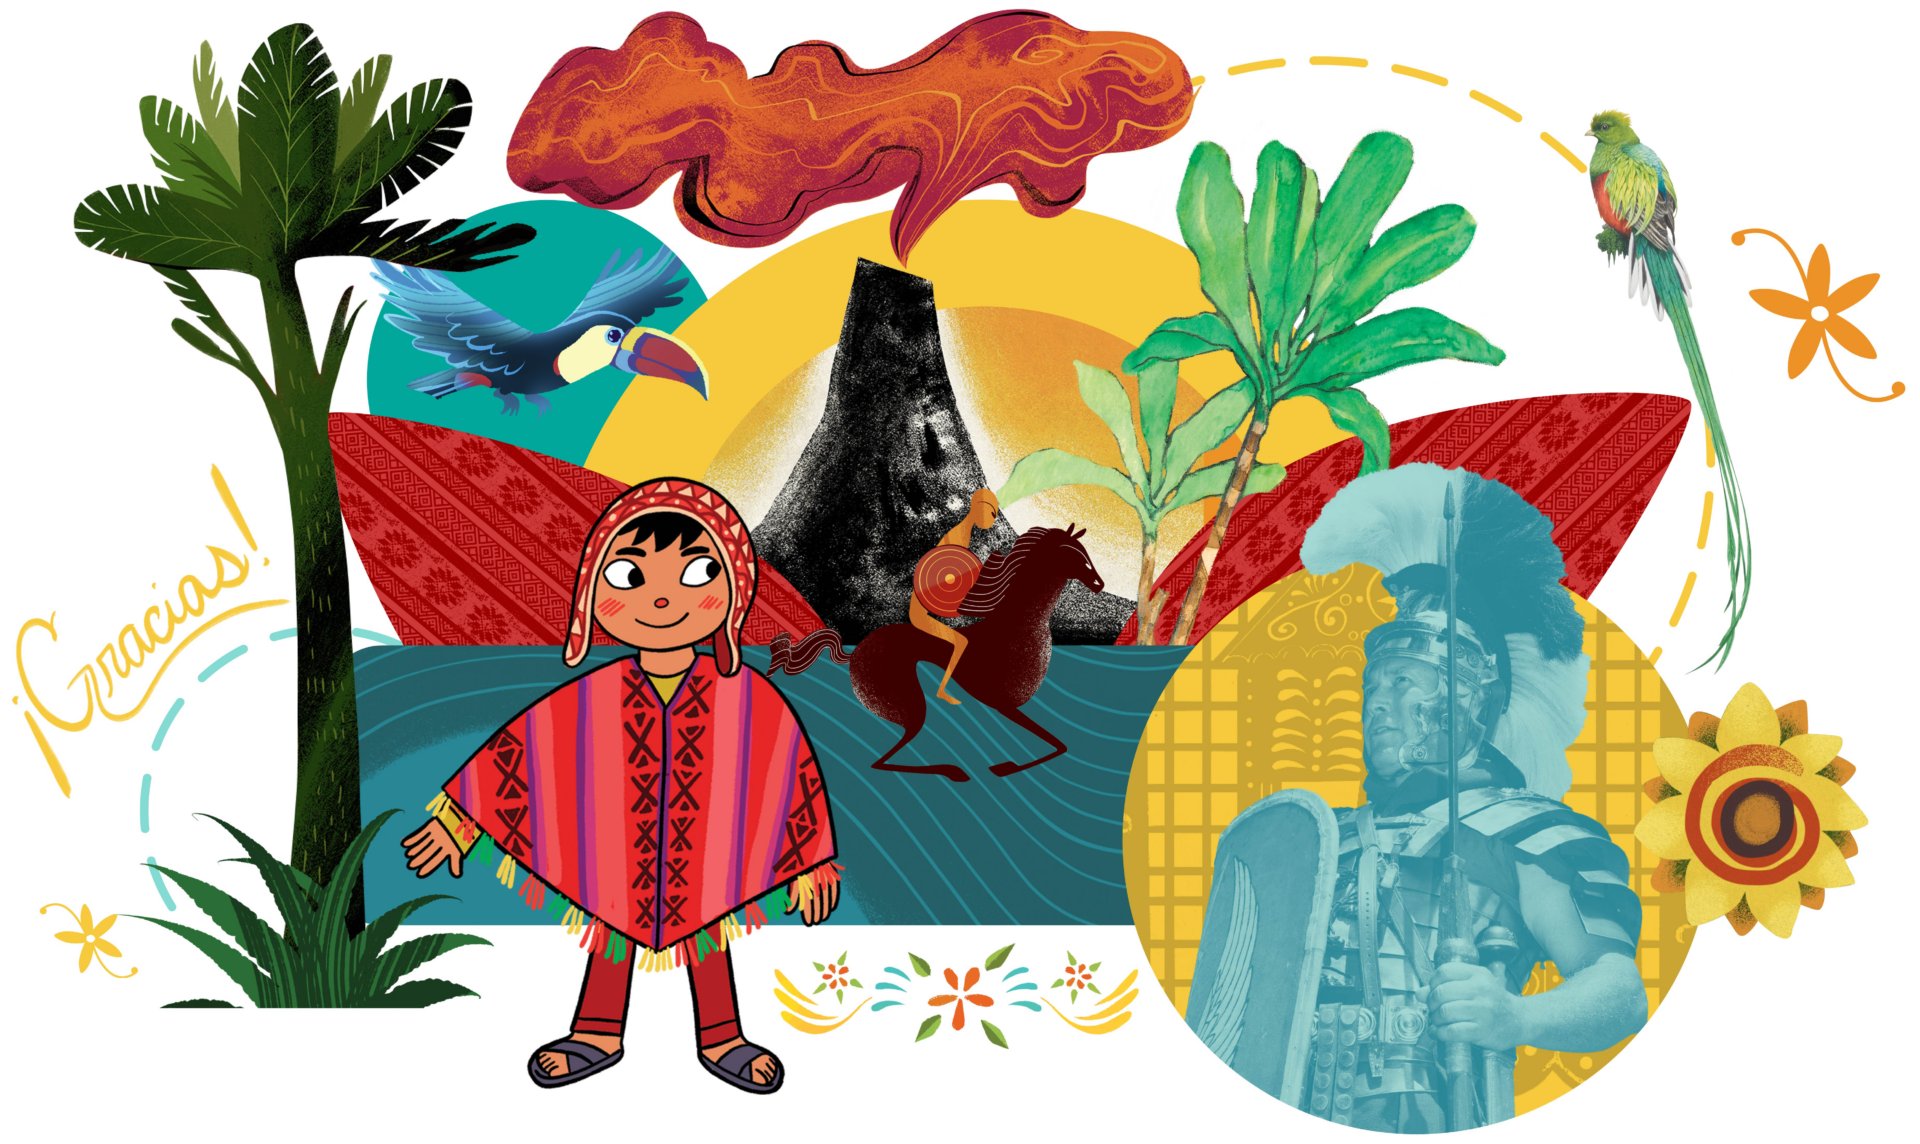 Colorful illustration featuring a landscape with a volcano and varied nature, a young girl in traditional attire, and motifs suggestive of latin american culture.